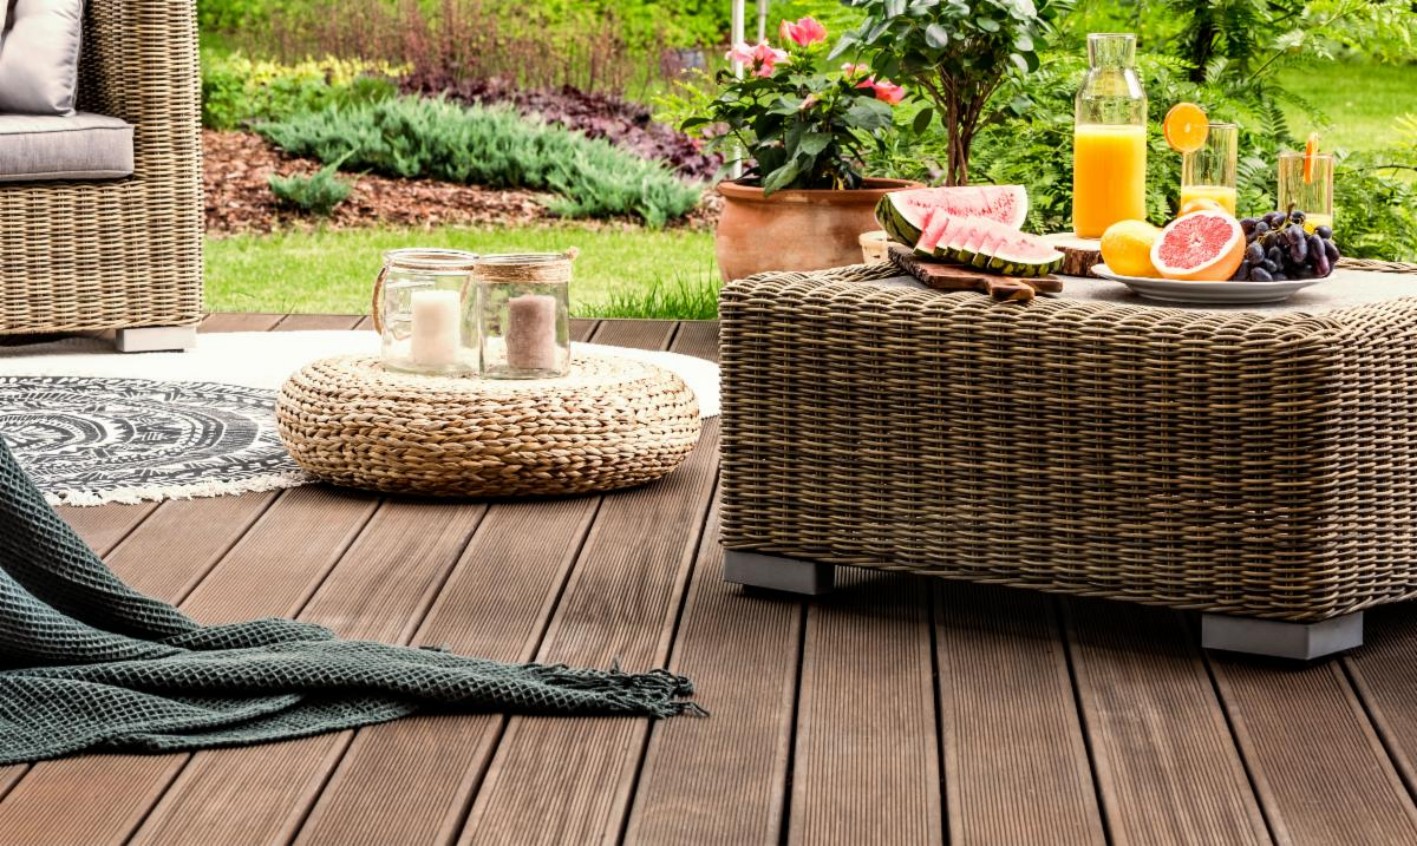 Composite Decking Ideas To Add Style And Structure To Your Outdoor Space